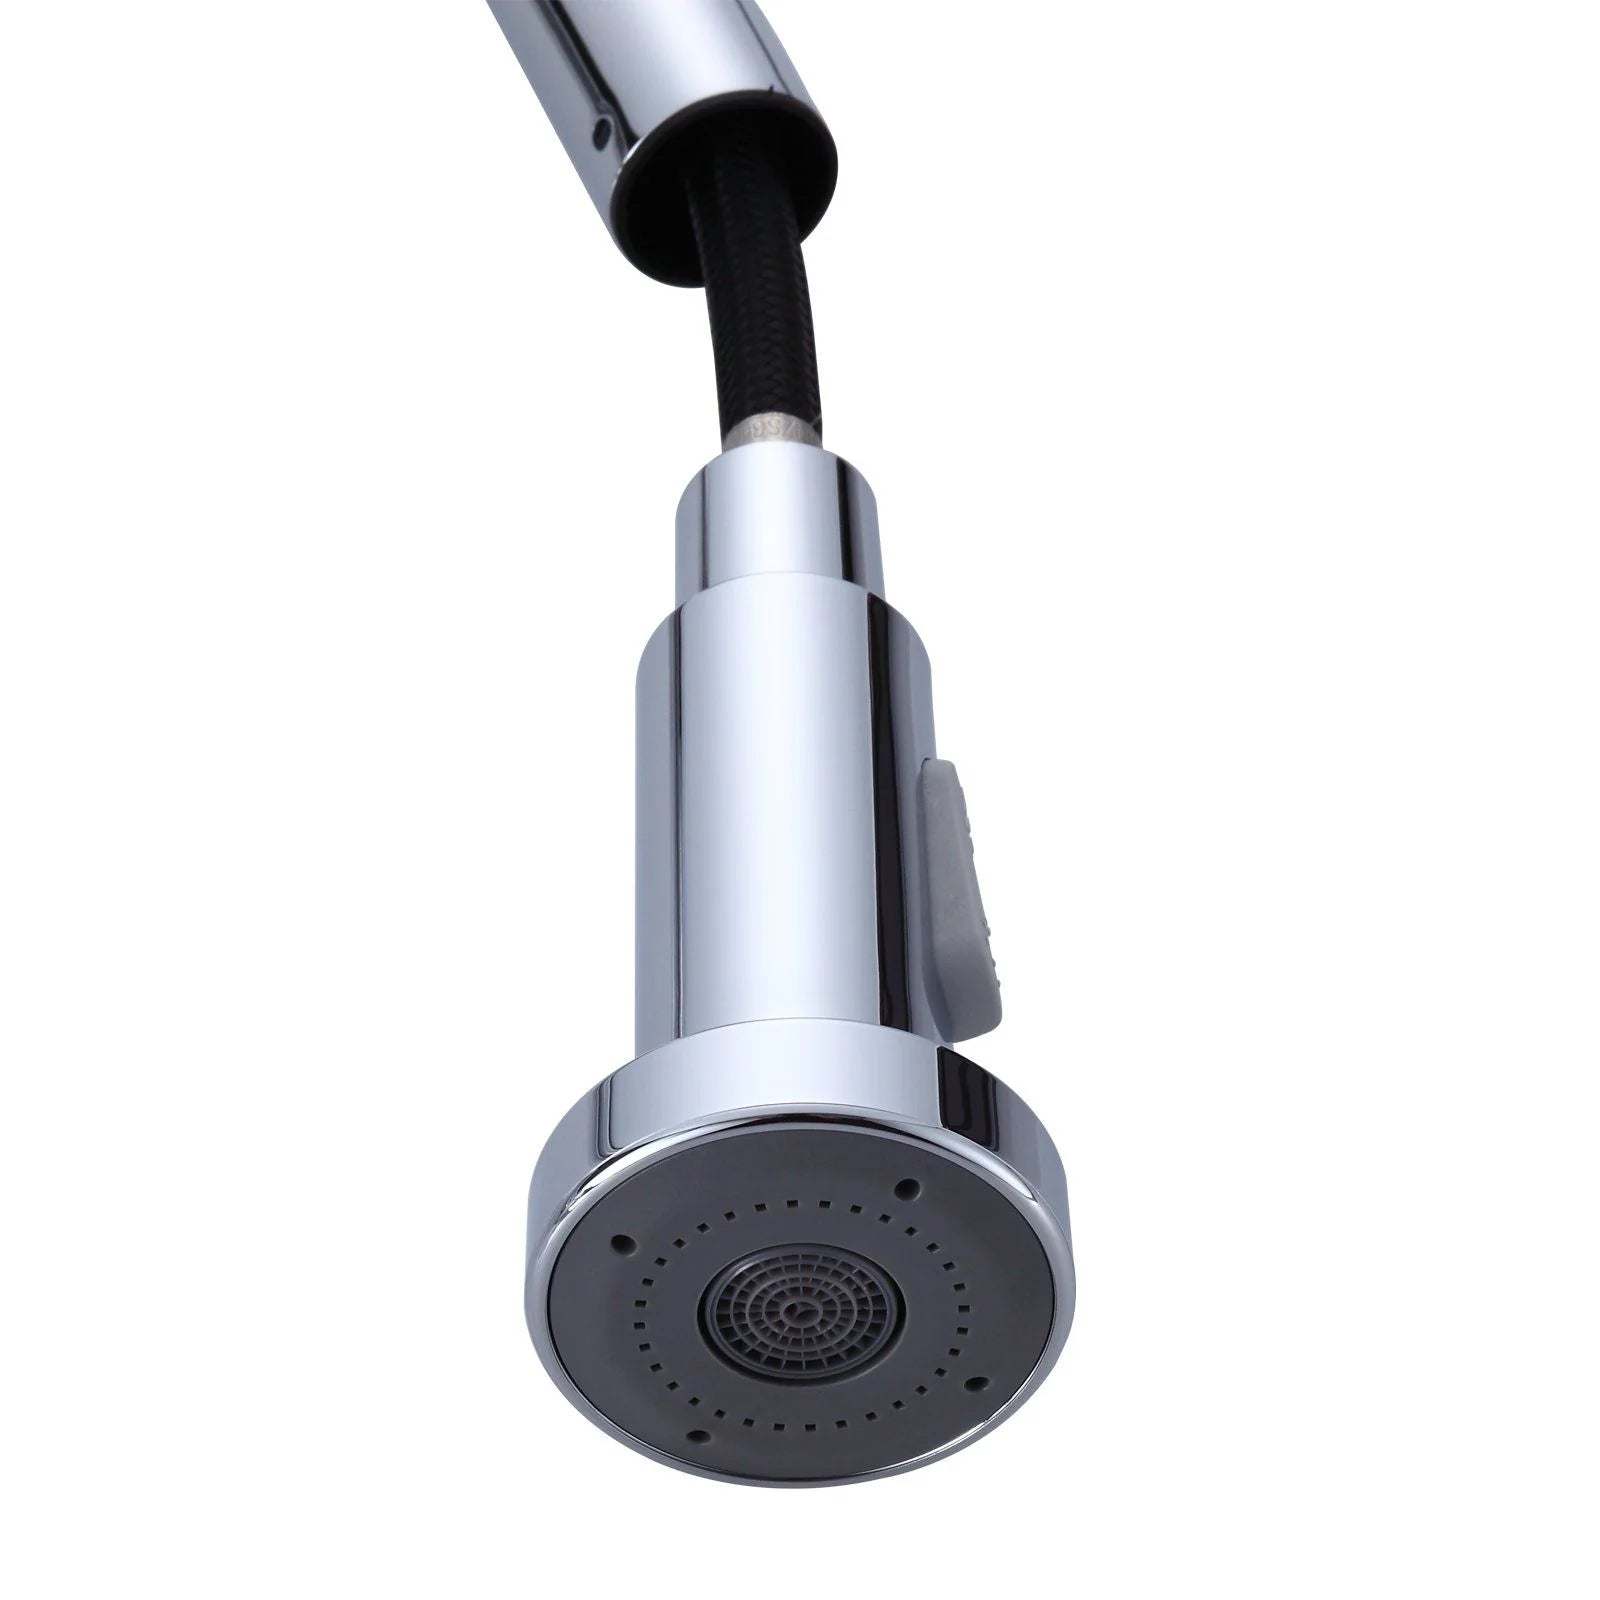 Circular kitchen sink mixer tap with retractable spray nozzle for enhanced functionality-CH1013.KM